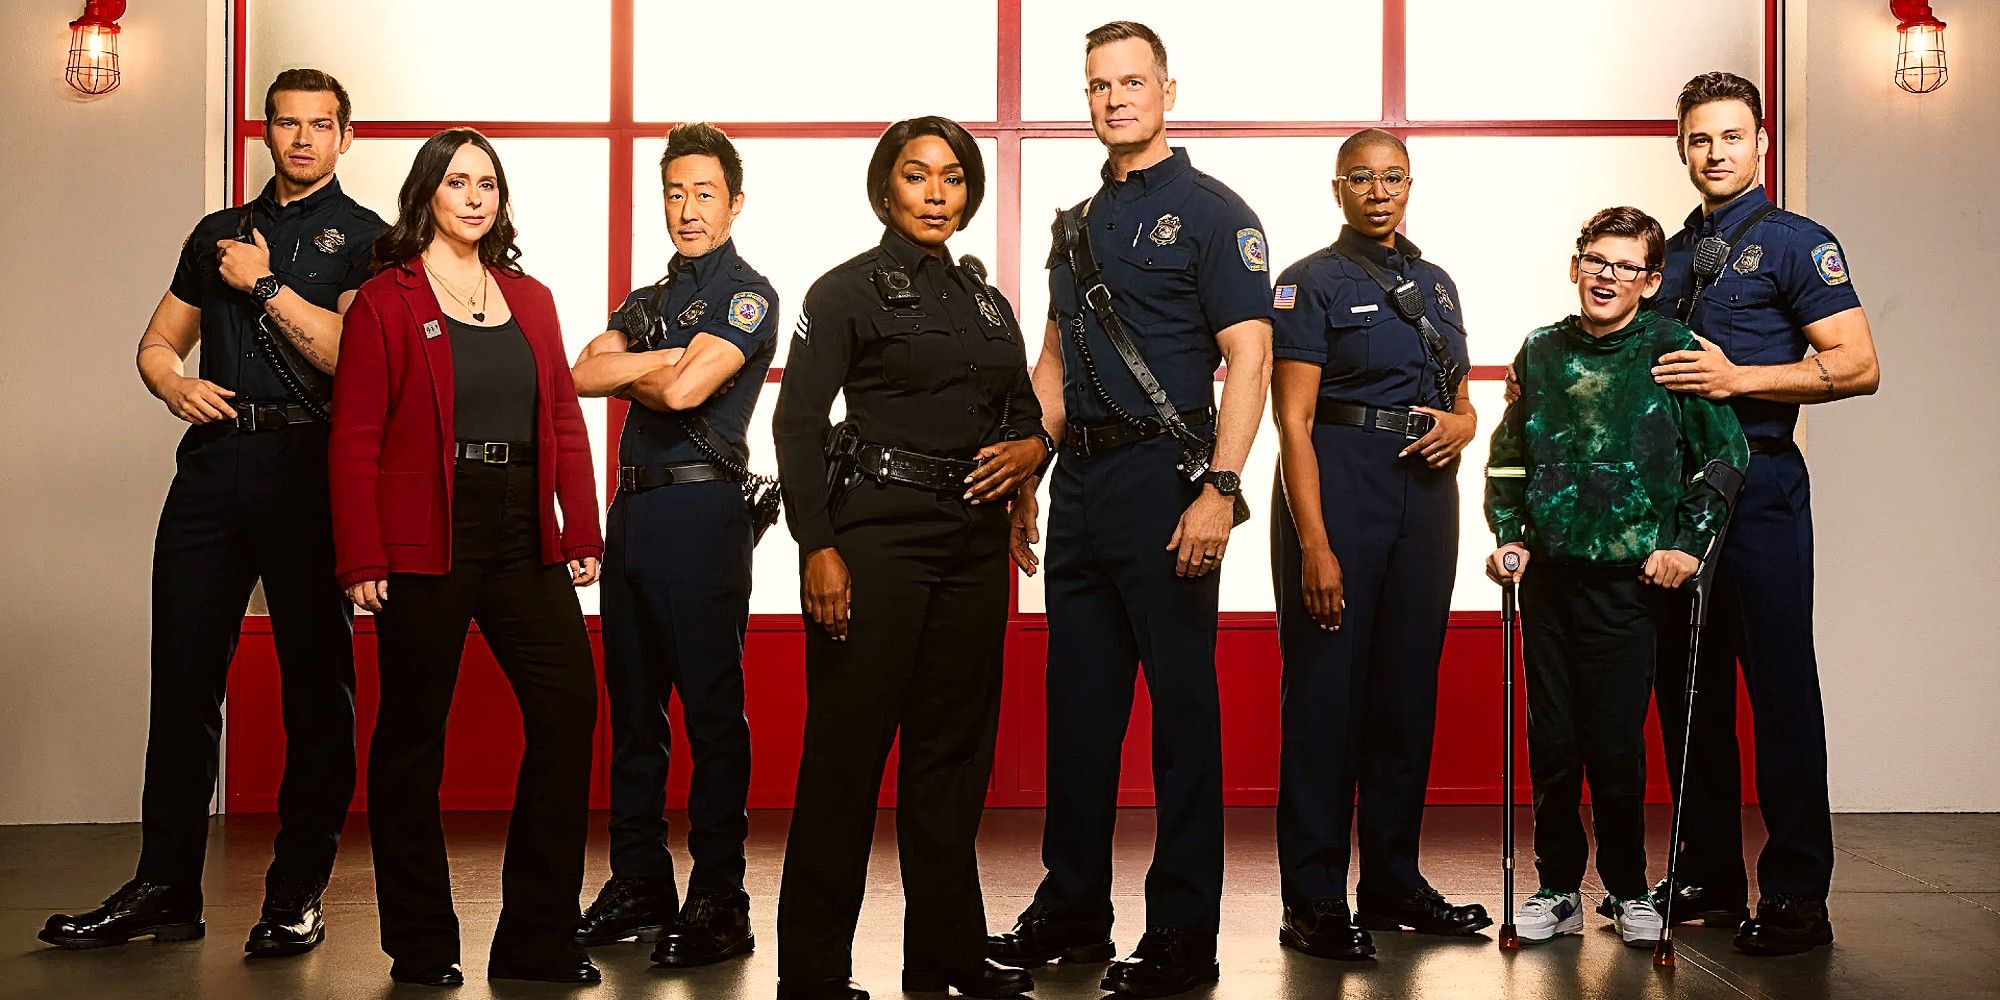 9-1-1 season 7 promotional poster containing: Buck, Maddie, Chimney, Athena, Bobby, Hen, Christopher, and Eddie, left to right